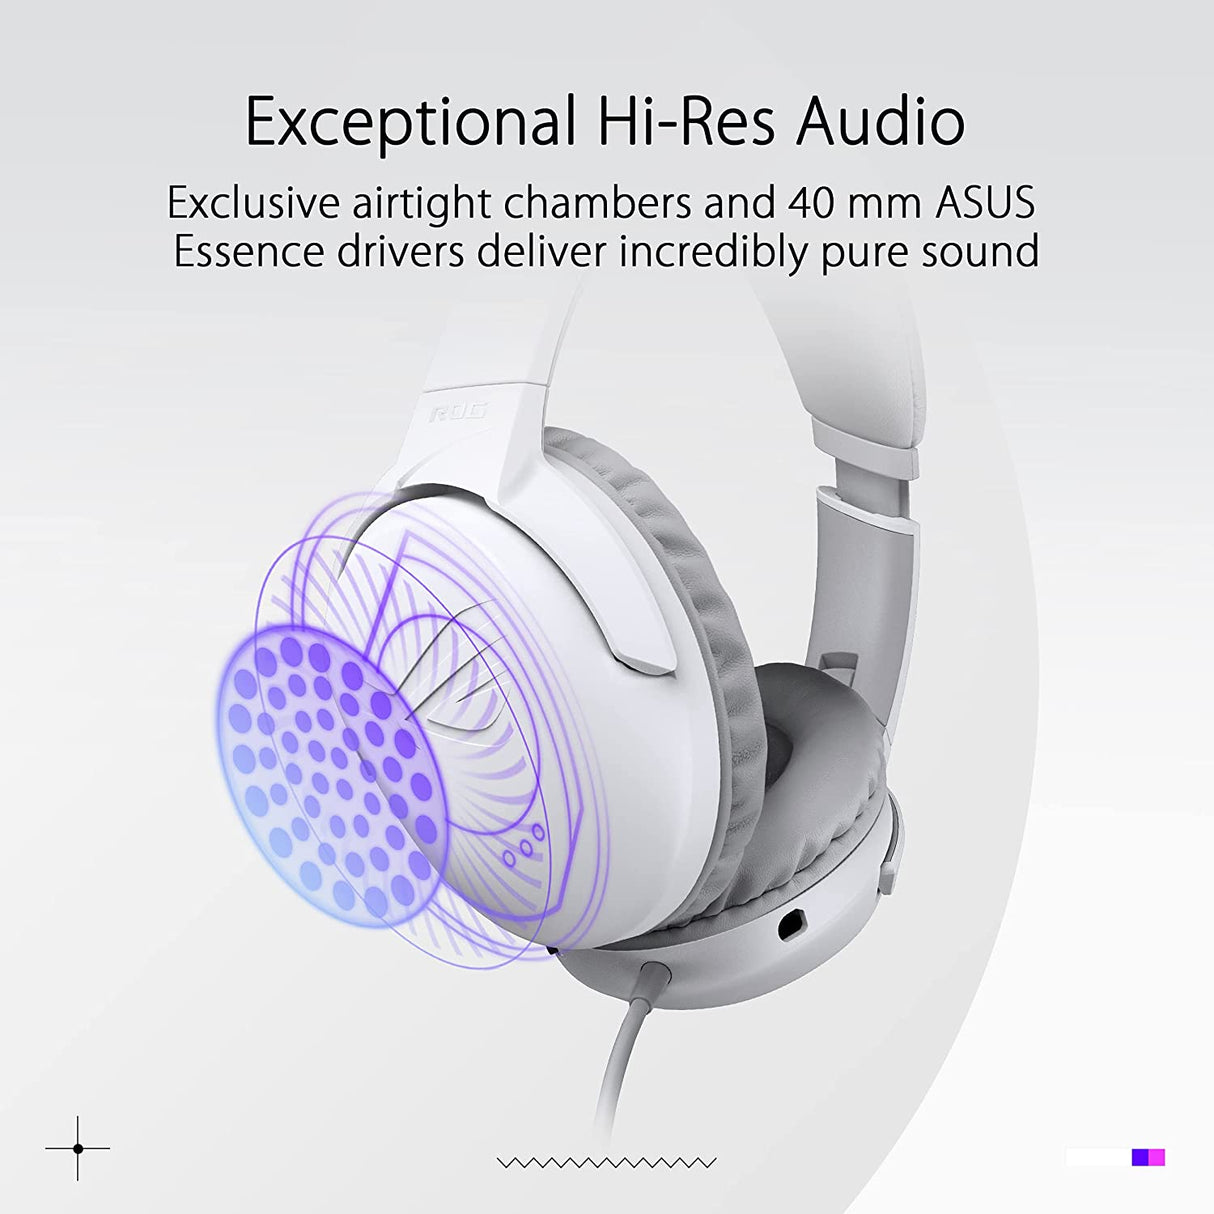 ASUS ROG Strix Go Core Moonlight White Gaming Headset | Hi-Res Audio, 3.5mm Jack, Volume and Mic Control, Lightweight Build, Compatible with PC, PS5, Xbox One, Nintendo Switch and Mobile Devices Strix Go Core Moonlight (Wired)